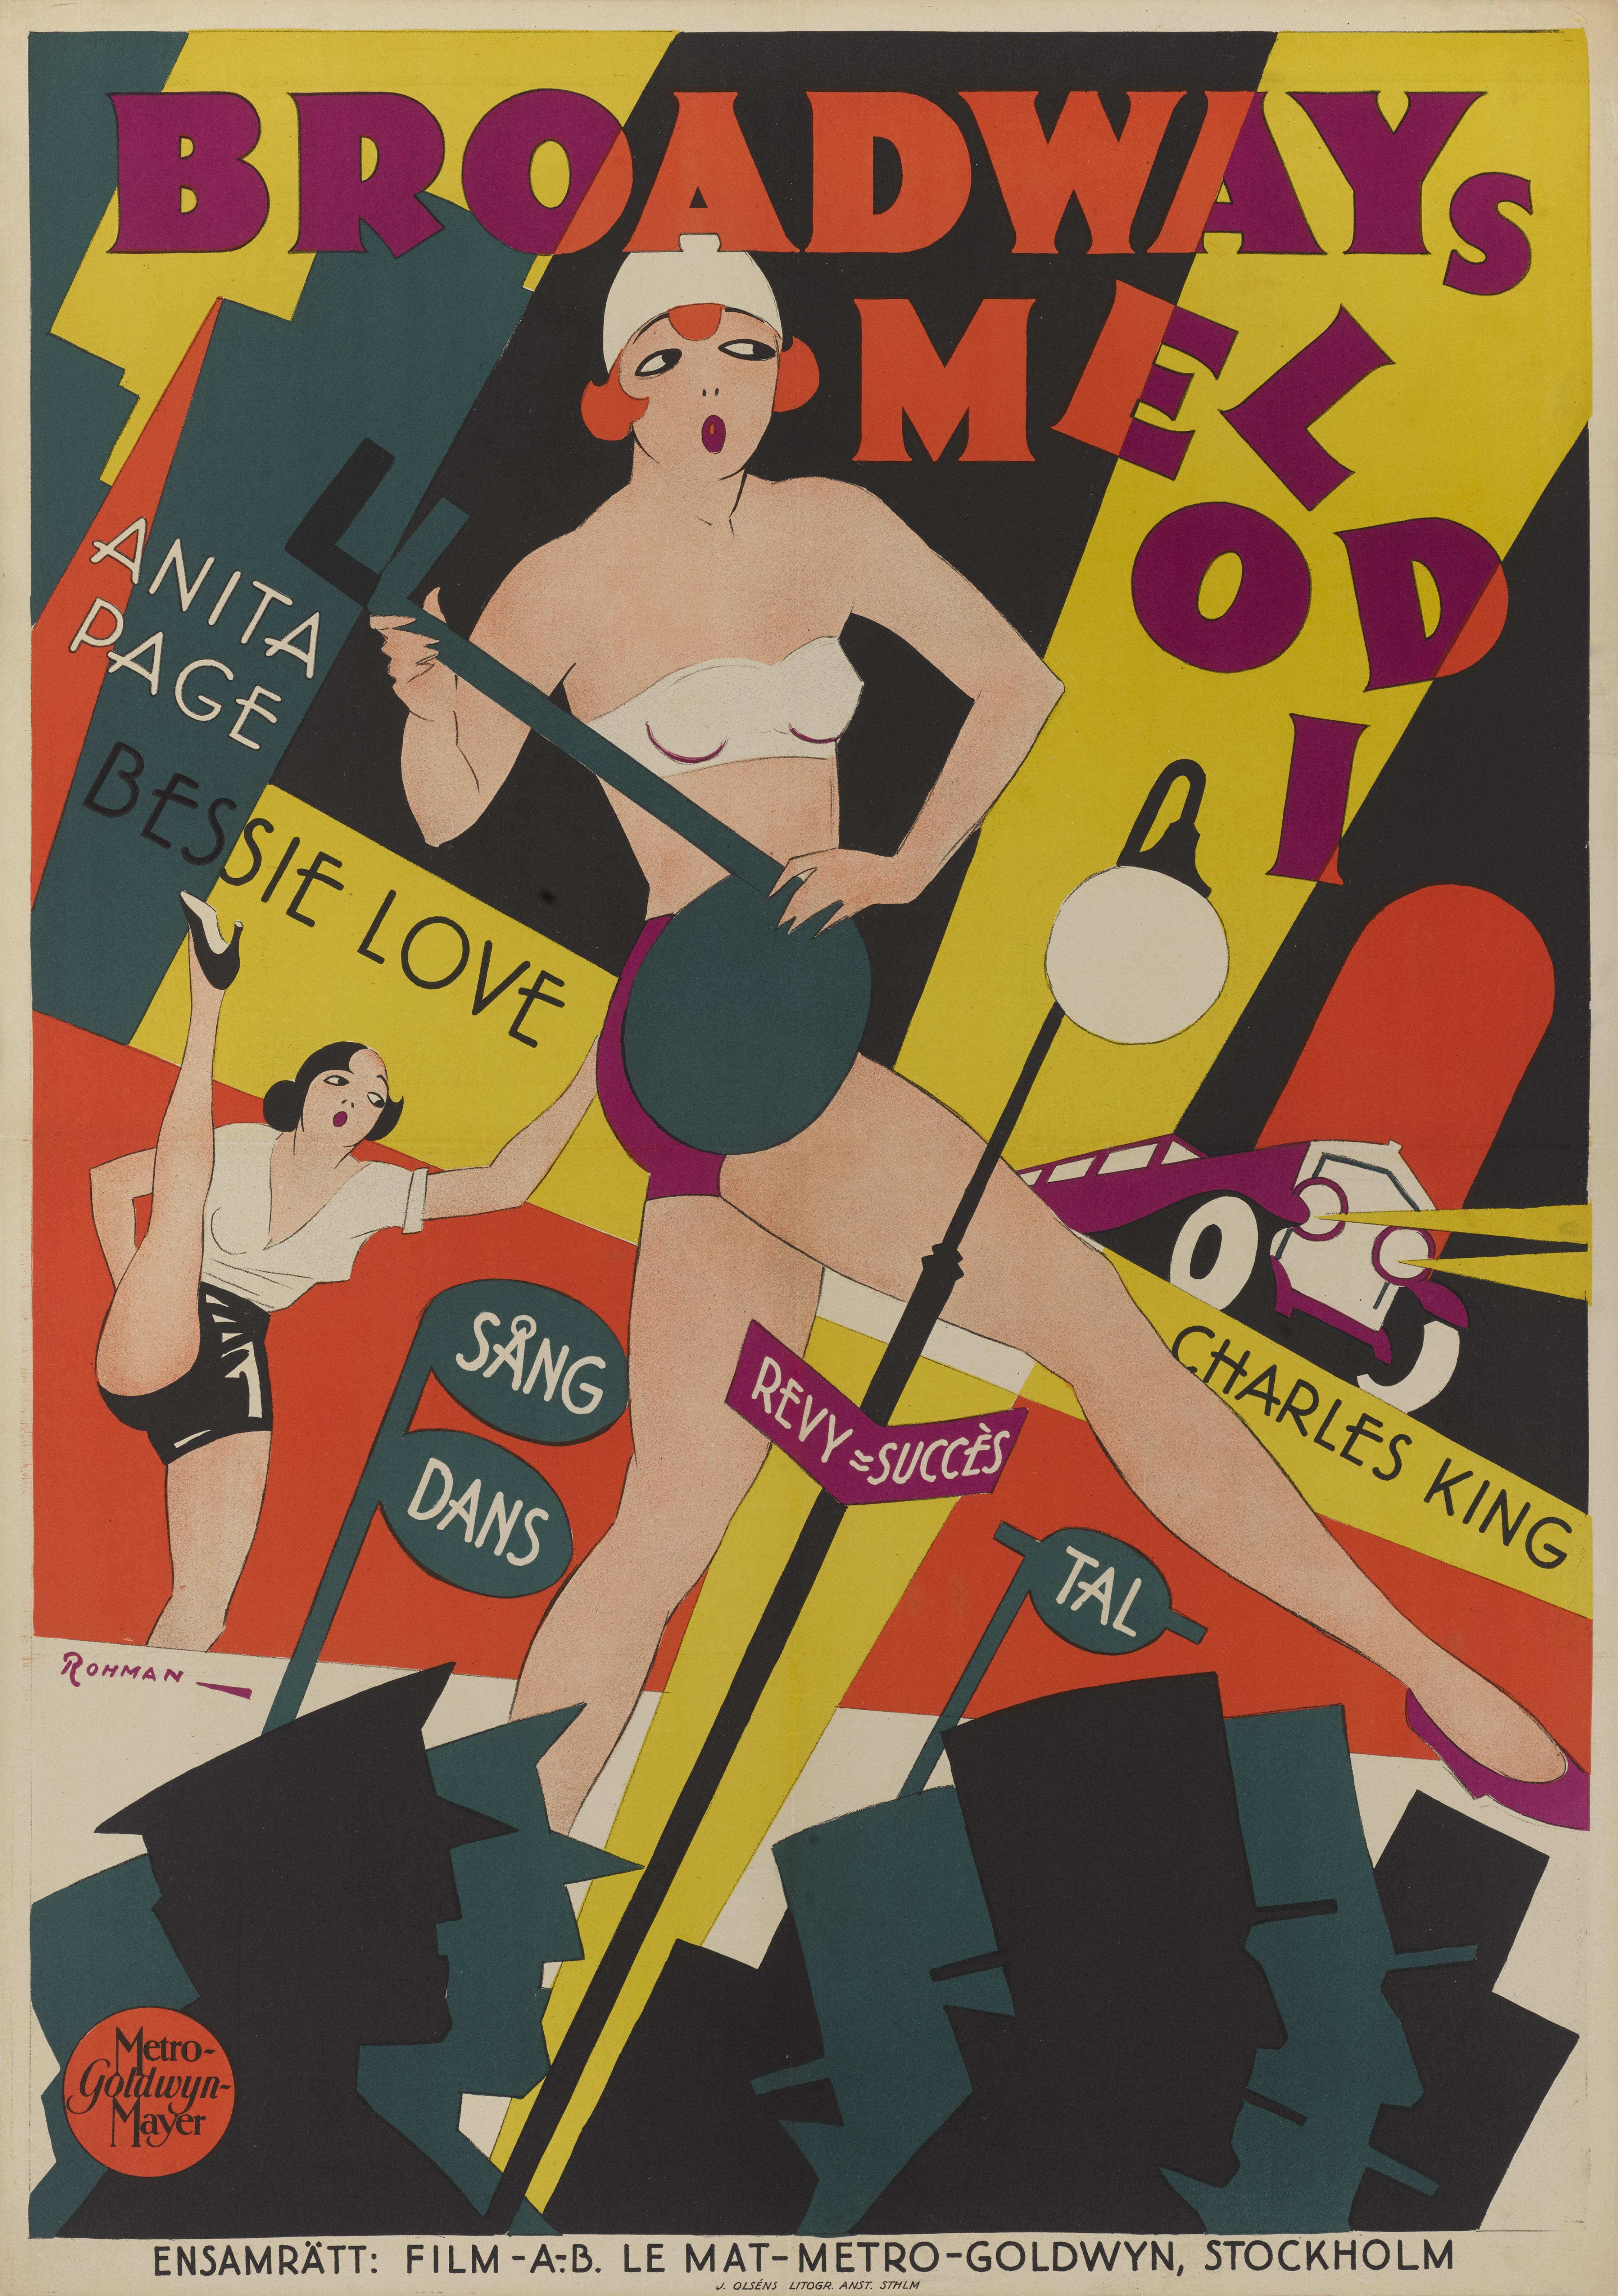 Original Swedish film poster for The Broadway Melody 1929.
This film was directed by Harry Beaumont. It tells the story of two Vaudeville sisters trying to get a break on Broadway. This was Metro-Goldwyn-Mayer's first musical, which won them an